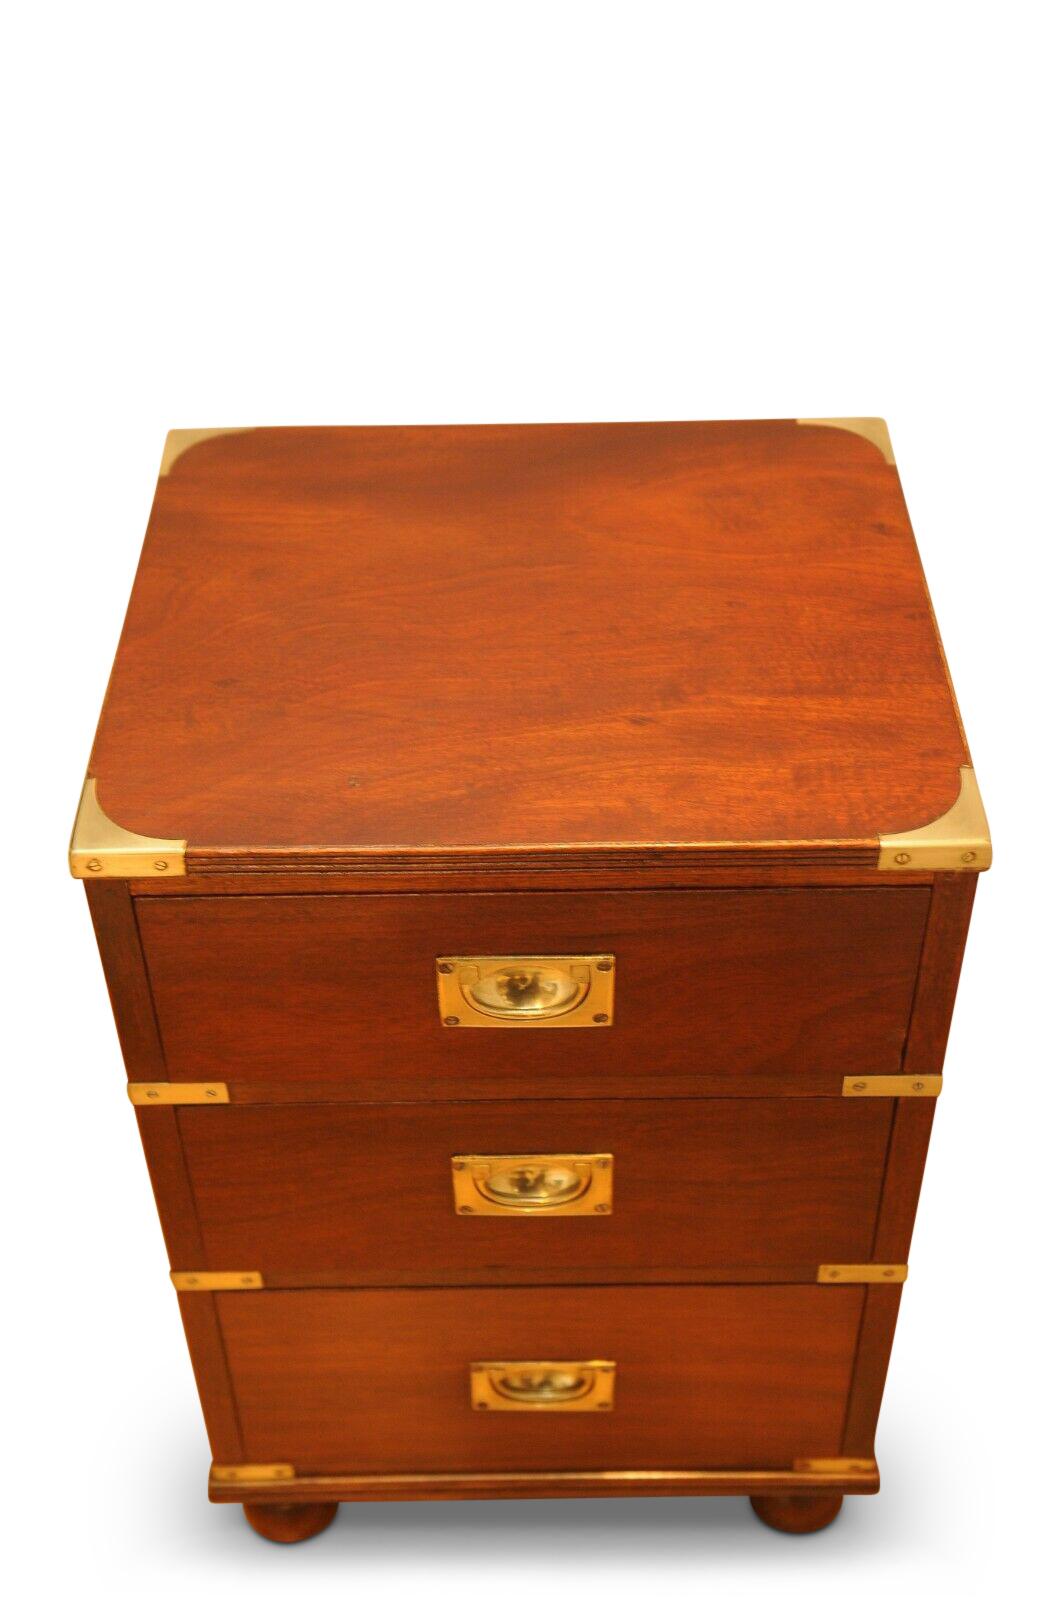 British Military Campaign Chest Brass Bound Mahogany Three-Drawer Pedestal, Side Table